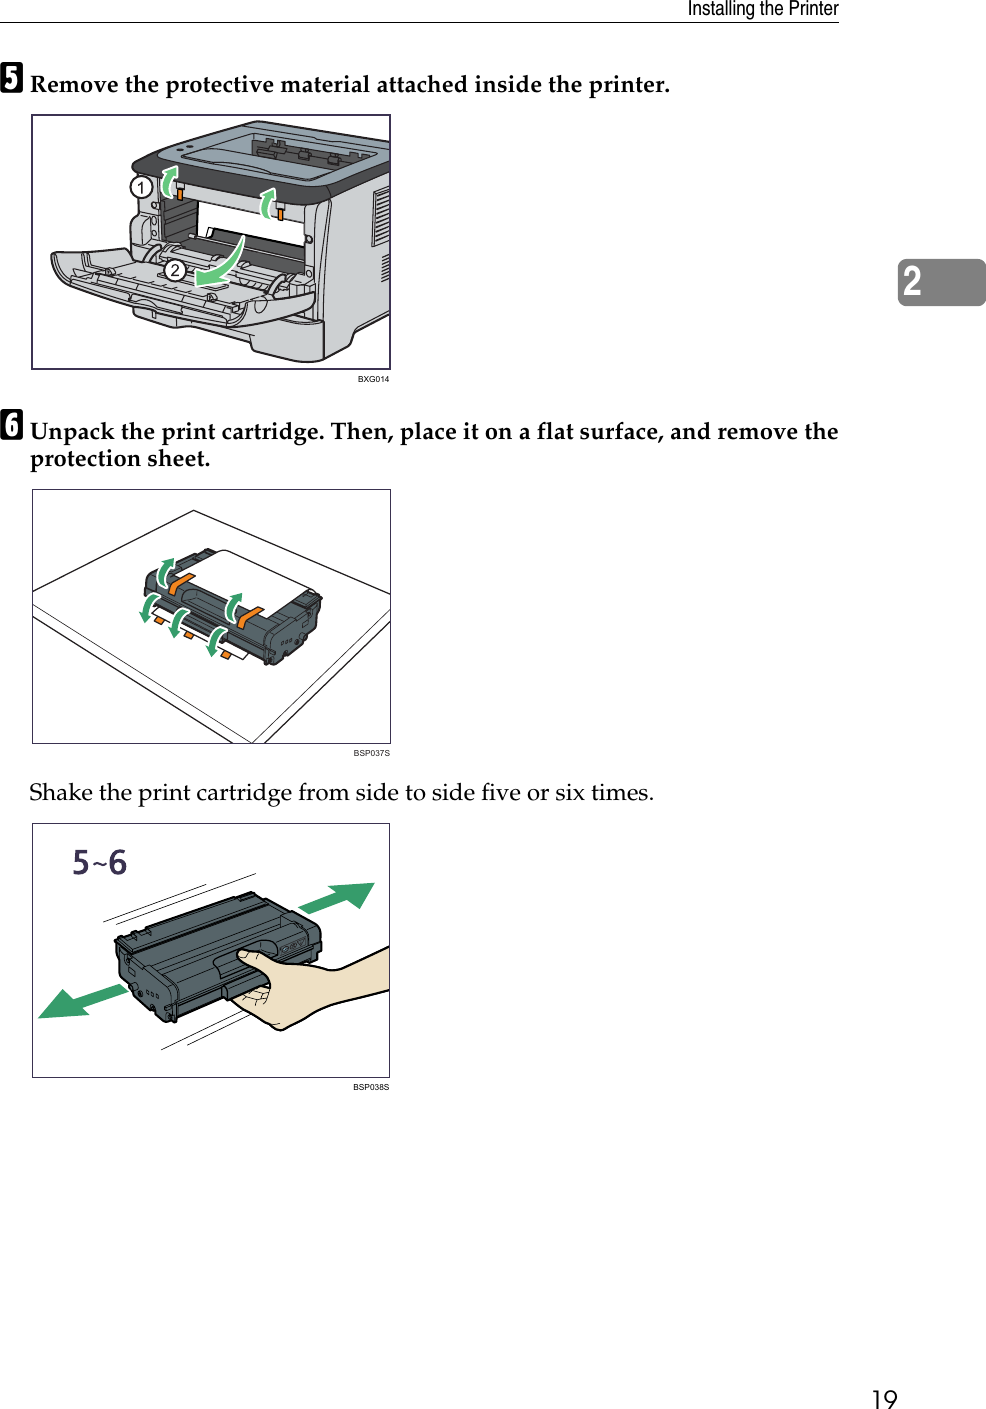 Installing the Printer192ERemove the protective material attached inside the printer.FUnpack the print cartridge. Then, place it on a flat surface, and remove theprotection sheet.Shake the print cartridge from side to side five or six times.BXG014BSP037SBSP038S